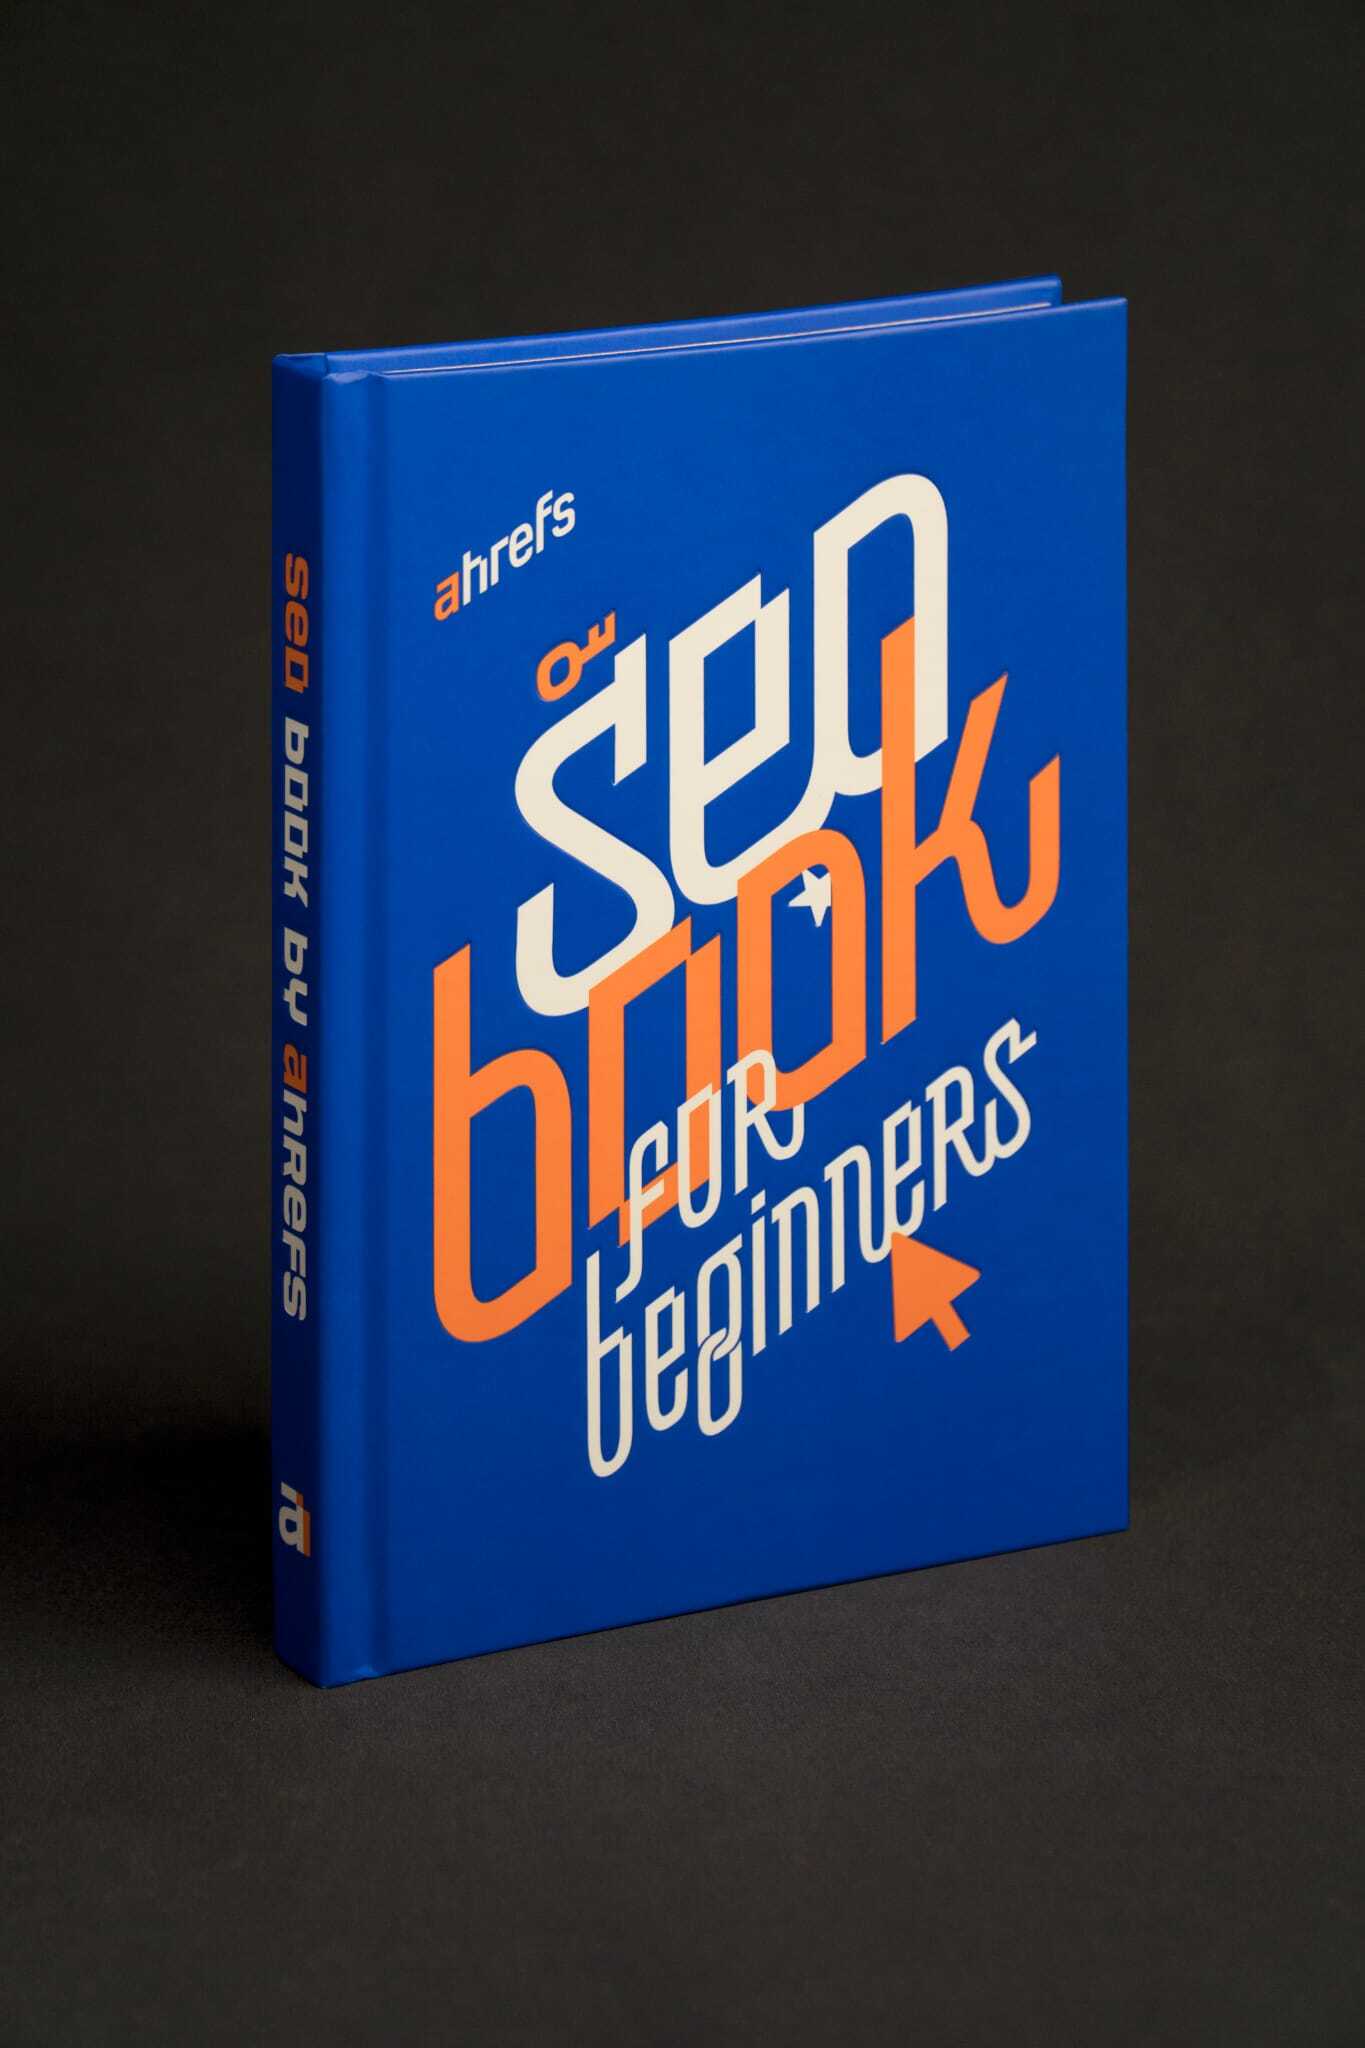 The cover of our new SEO book for beginners